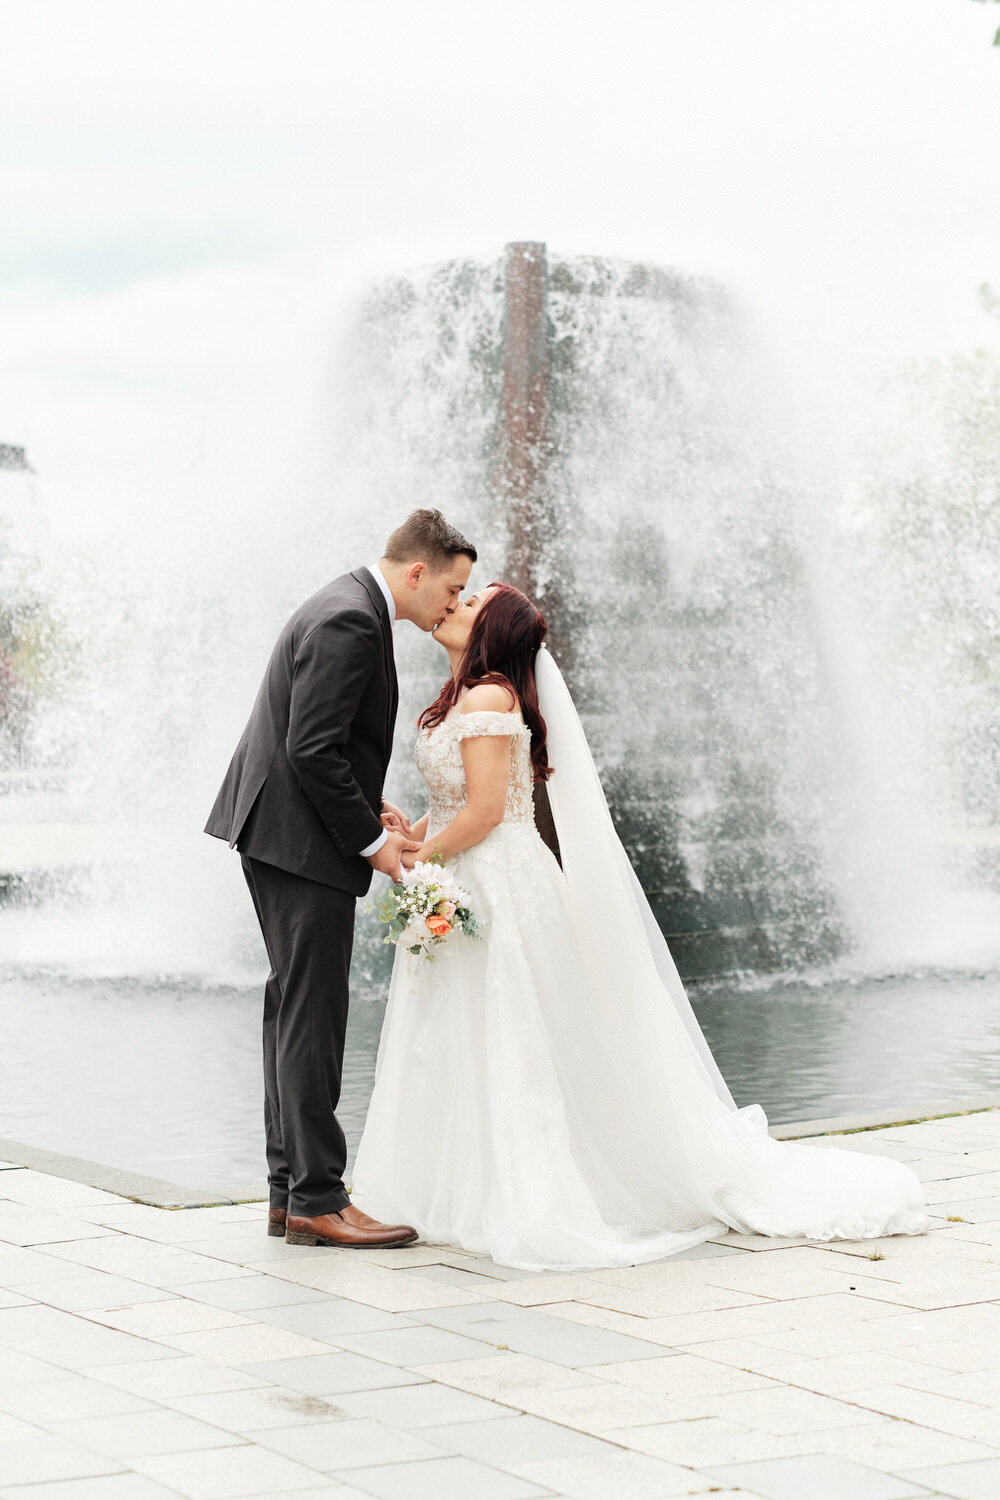 Bride and groom kiss as a waterfall goes off behind them